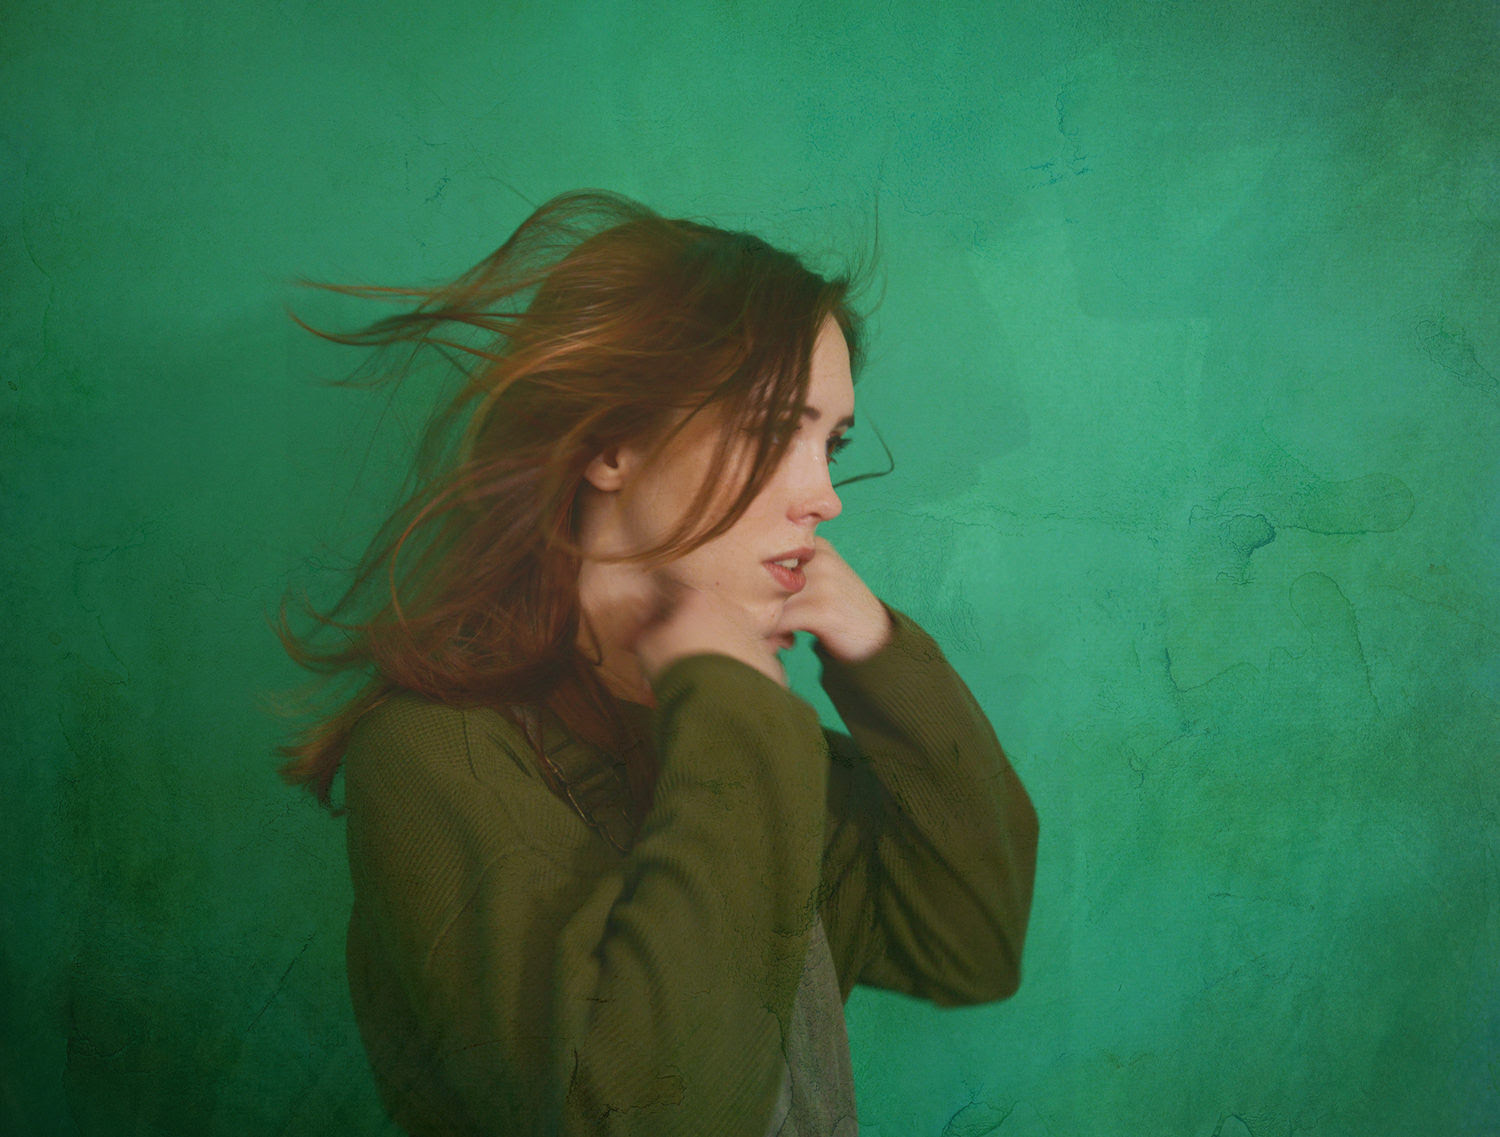 Soccer Mommy releases new single "Still Clean"